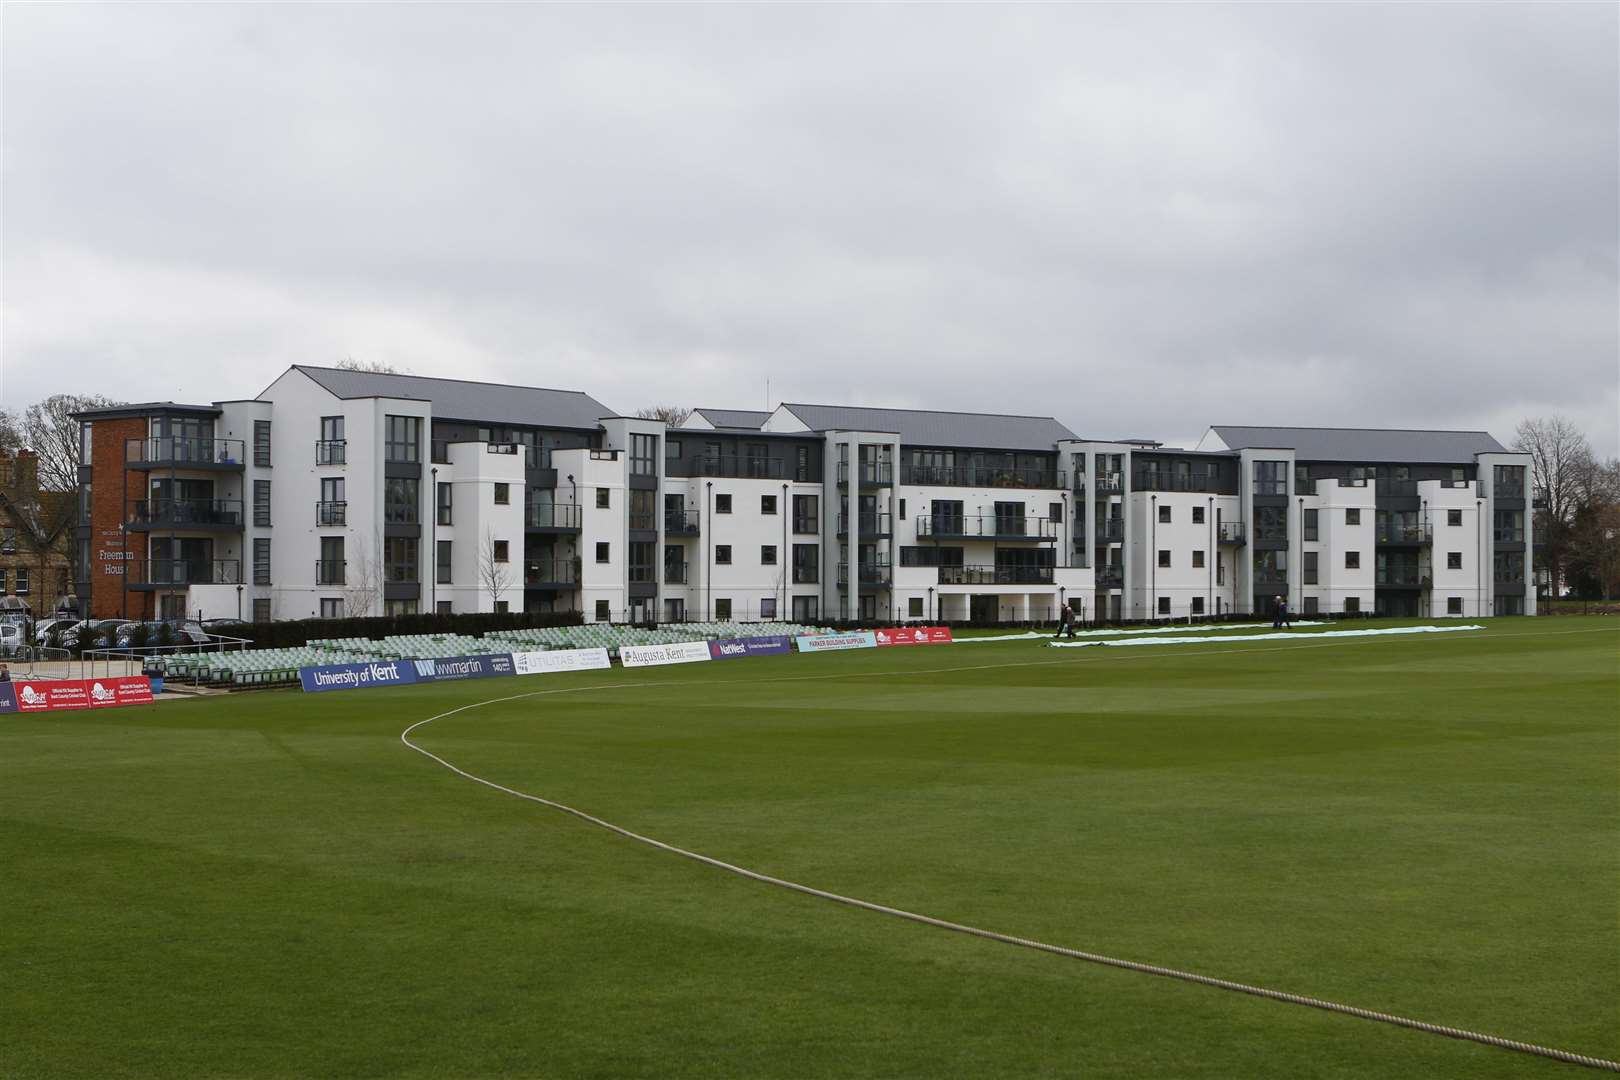 The retirement flats at The Spitfire Ground St Lawrence. Picture: Andy Jones.